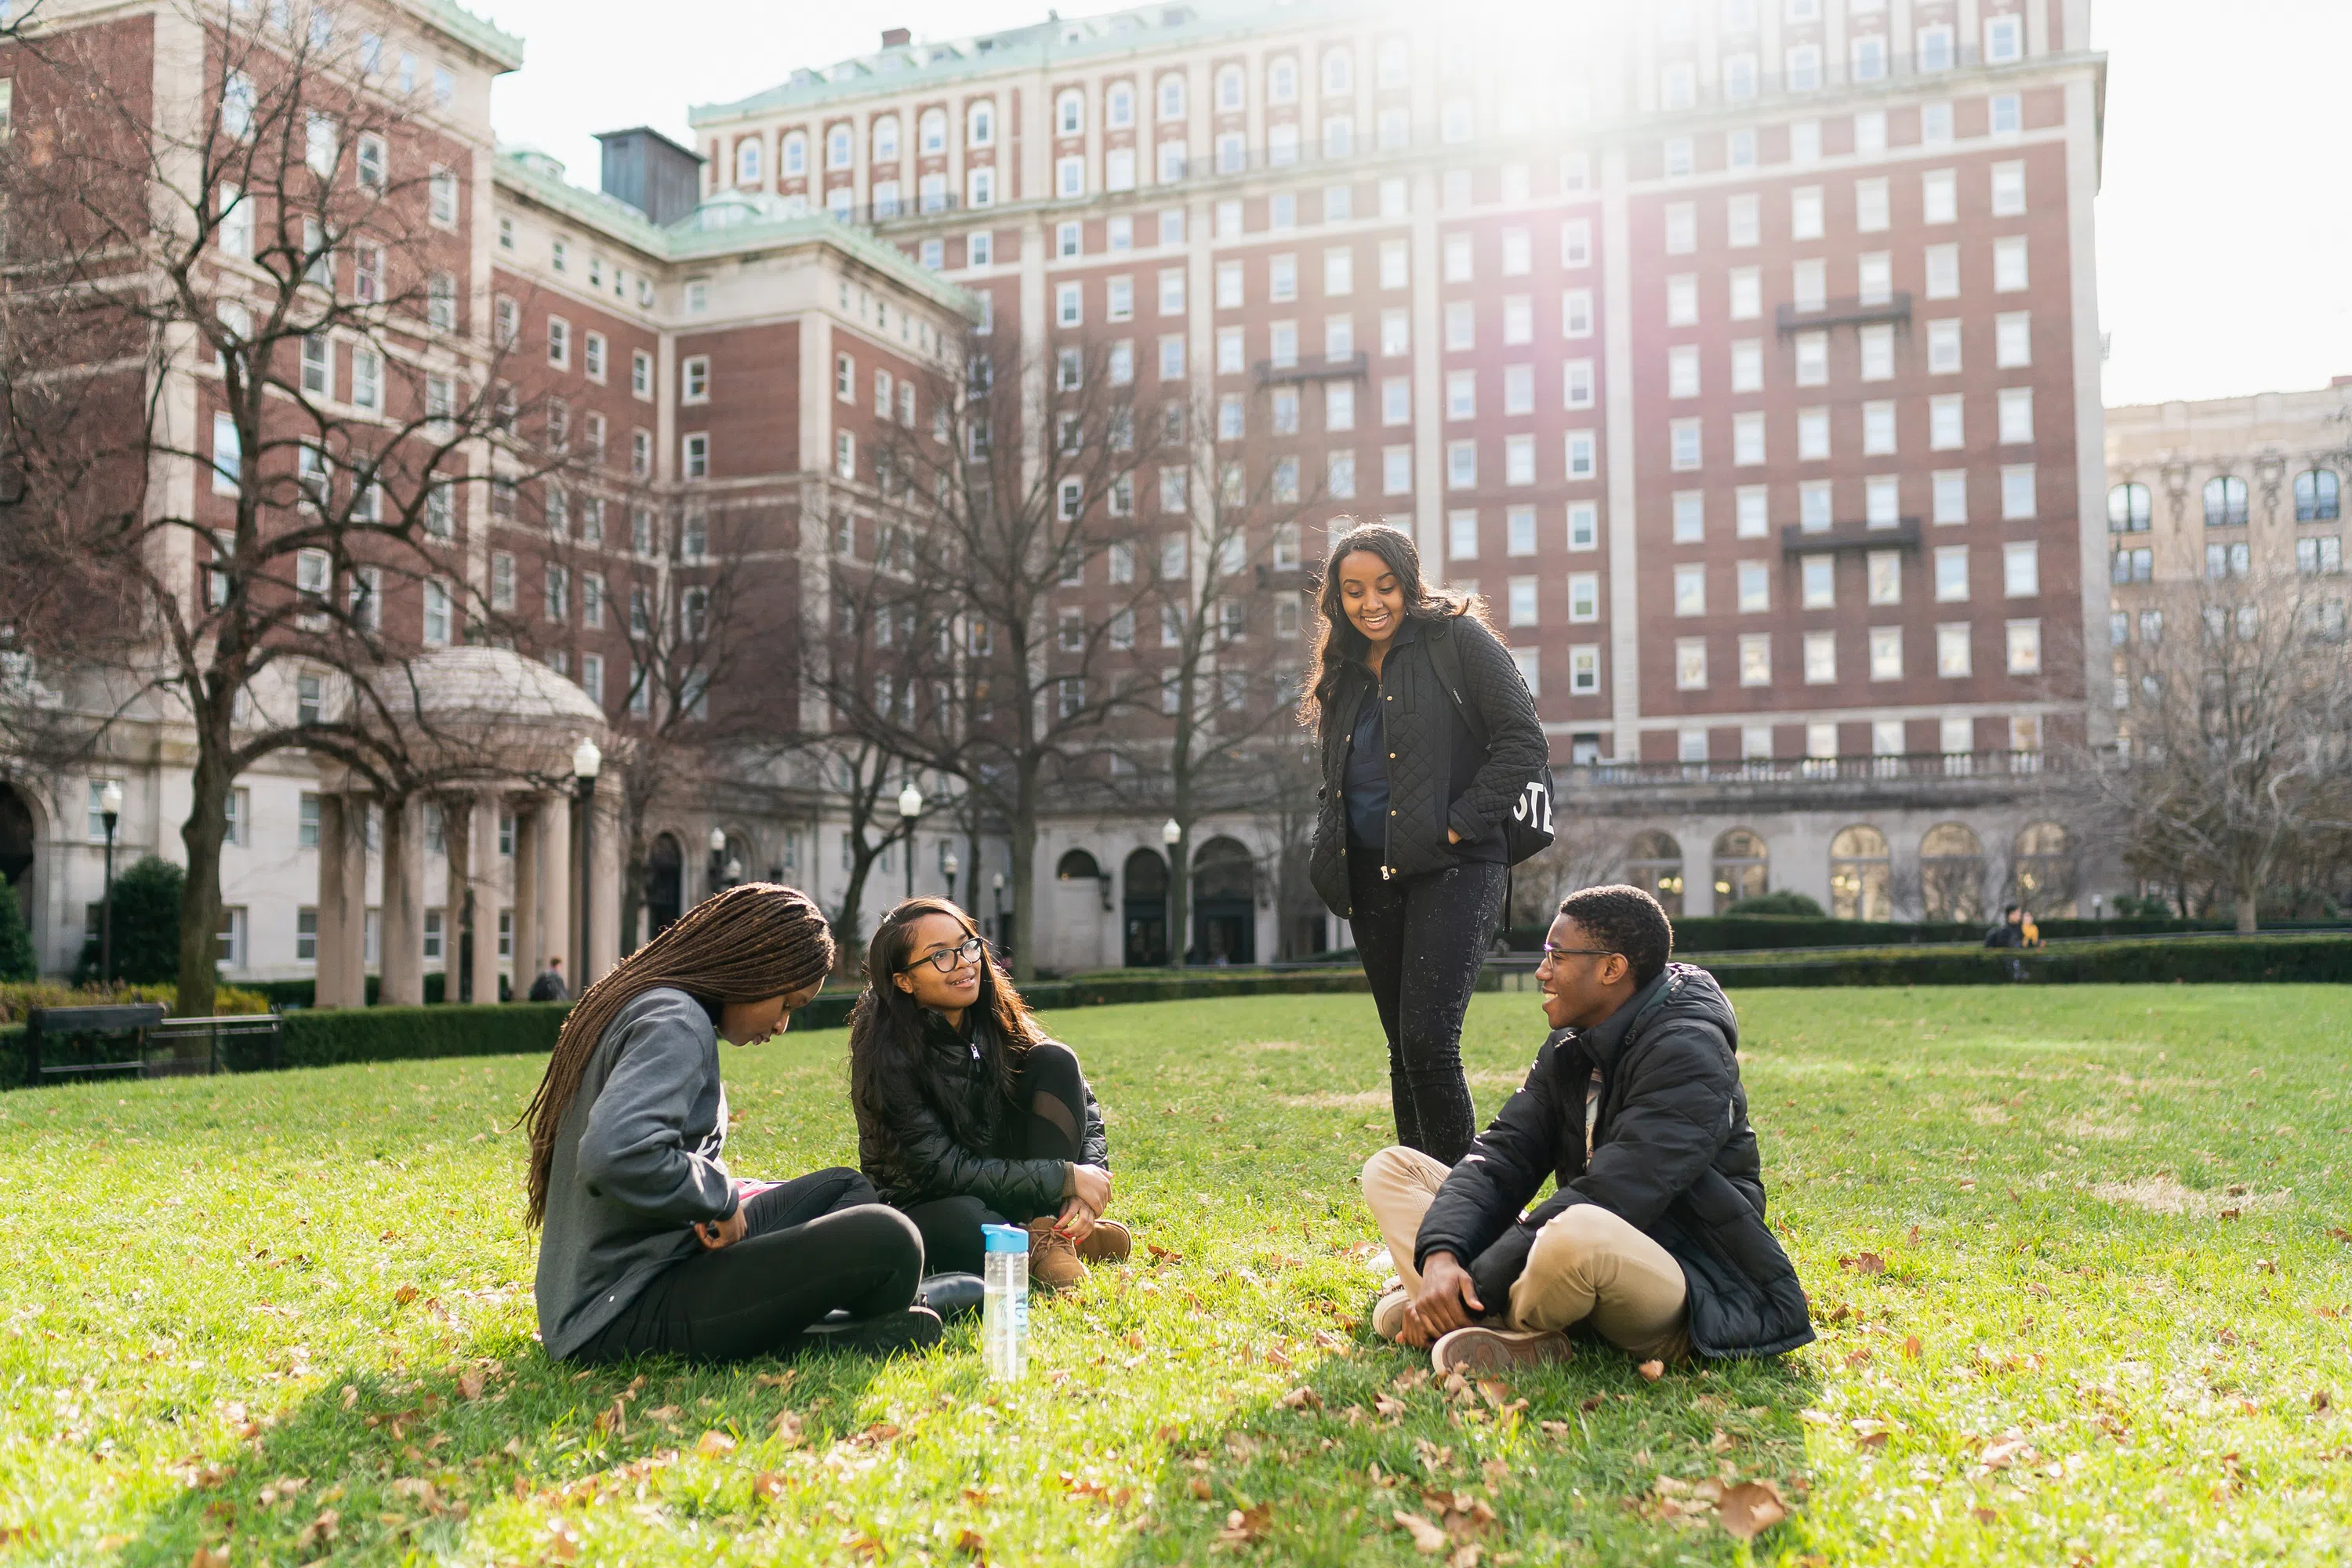 4 students gather on the green lawn with the residence halls in the background.